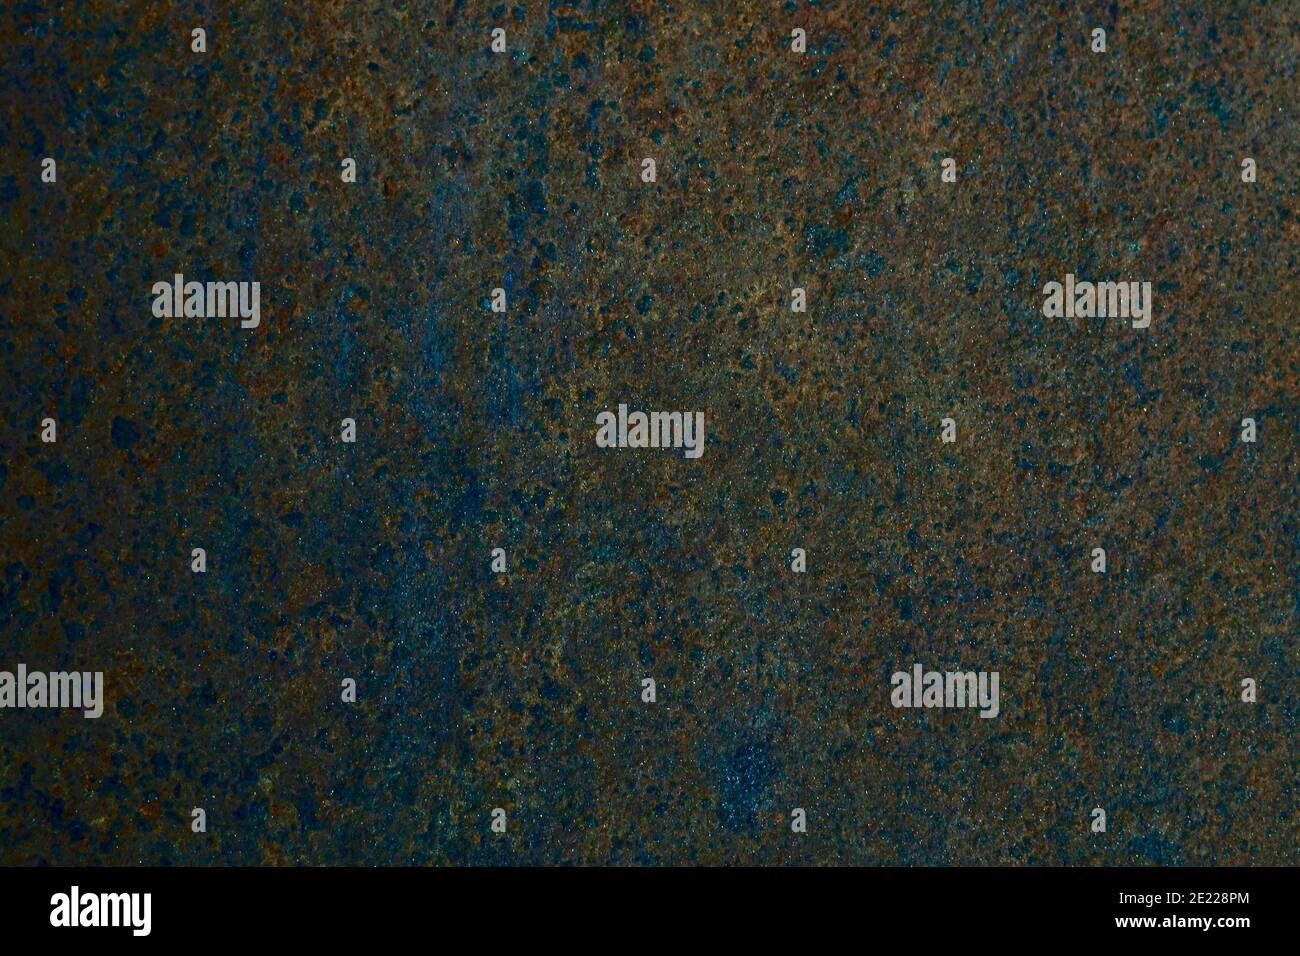 The background is rusty in places of oxidized homogeneous surface, with a wavy pattern, in dark tones, with a shaded left side. Stock Photo